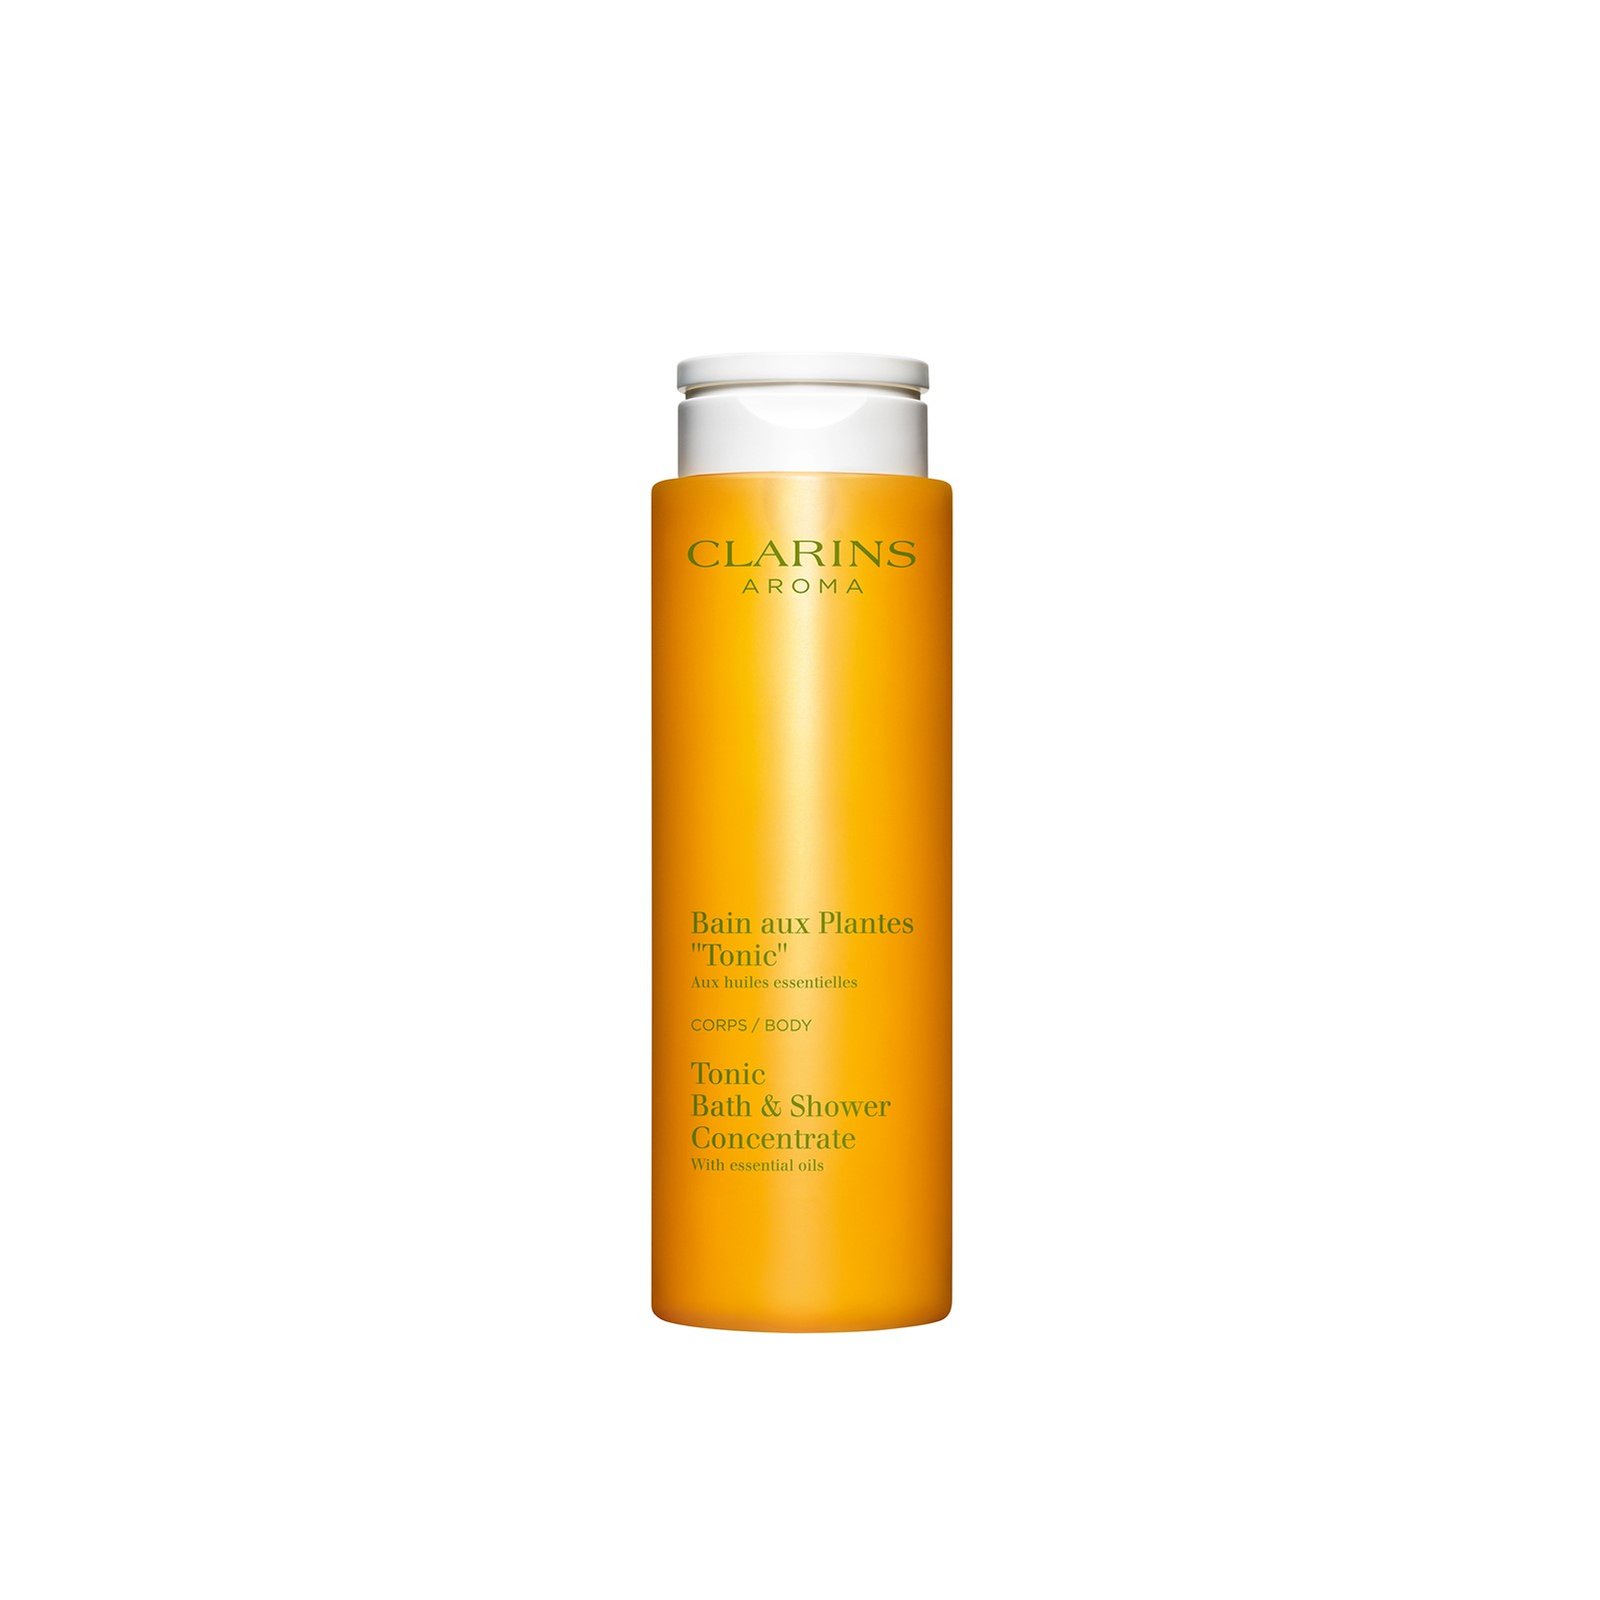 Clarins Aroma Tonic Bath & Shower Concentrate 200ml